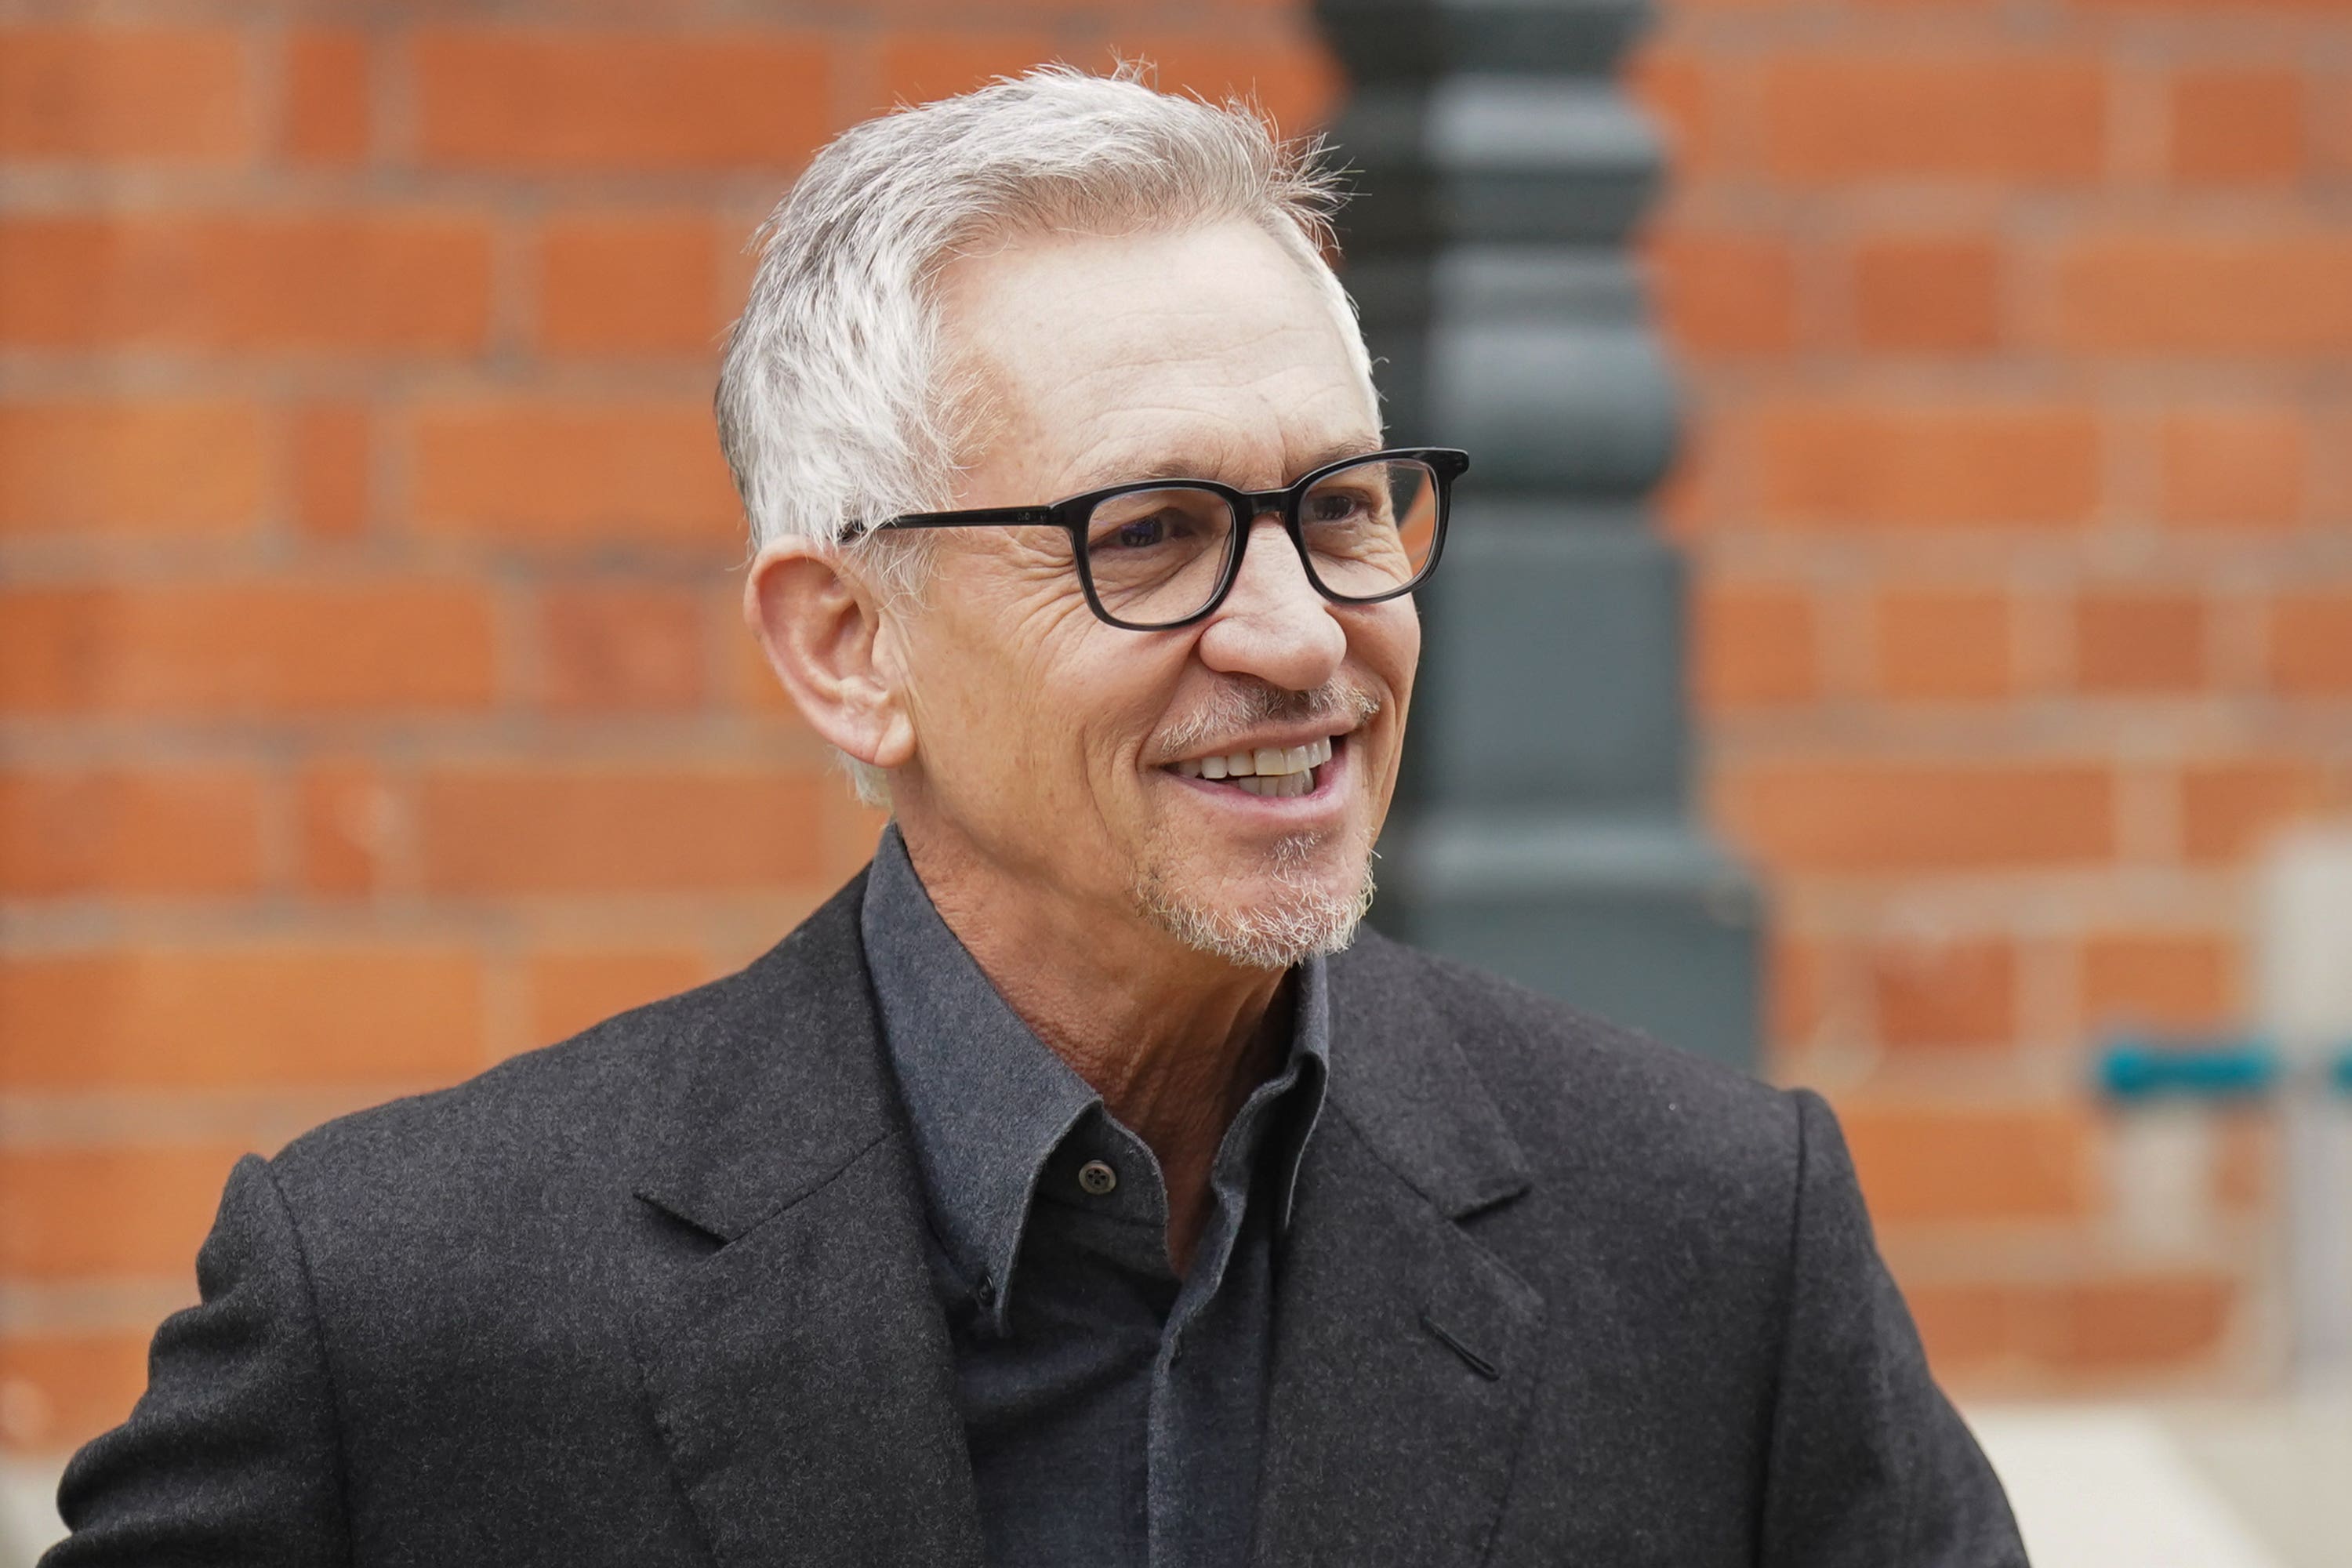 Match Of The Day host Gary Lineker leaves his home in London (James Manning/PA)